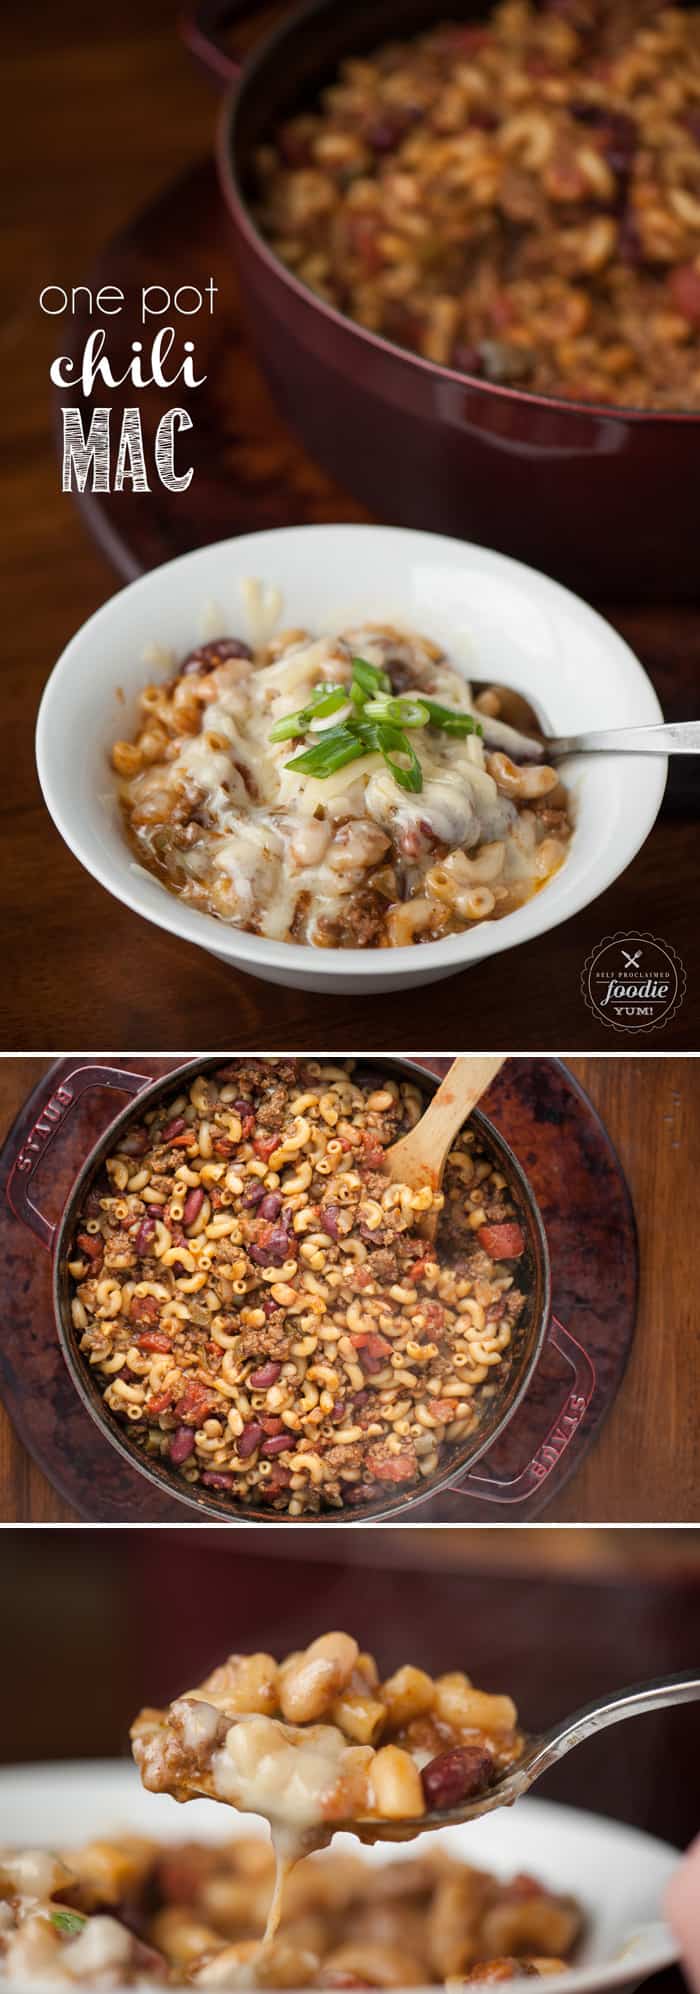 This tasty One Pot Chili Mac is an easy and filling meal that can be served up as a kid friendly family dinner or can feed a crowd while watching the game.